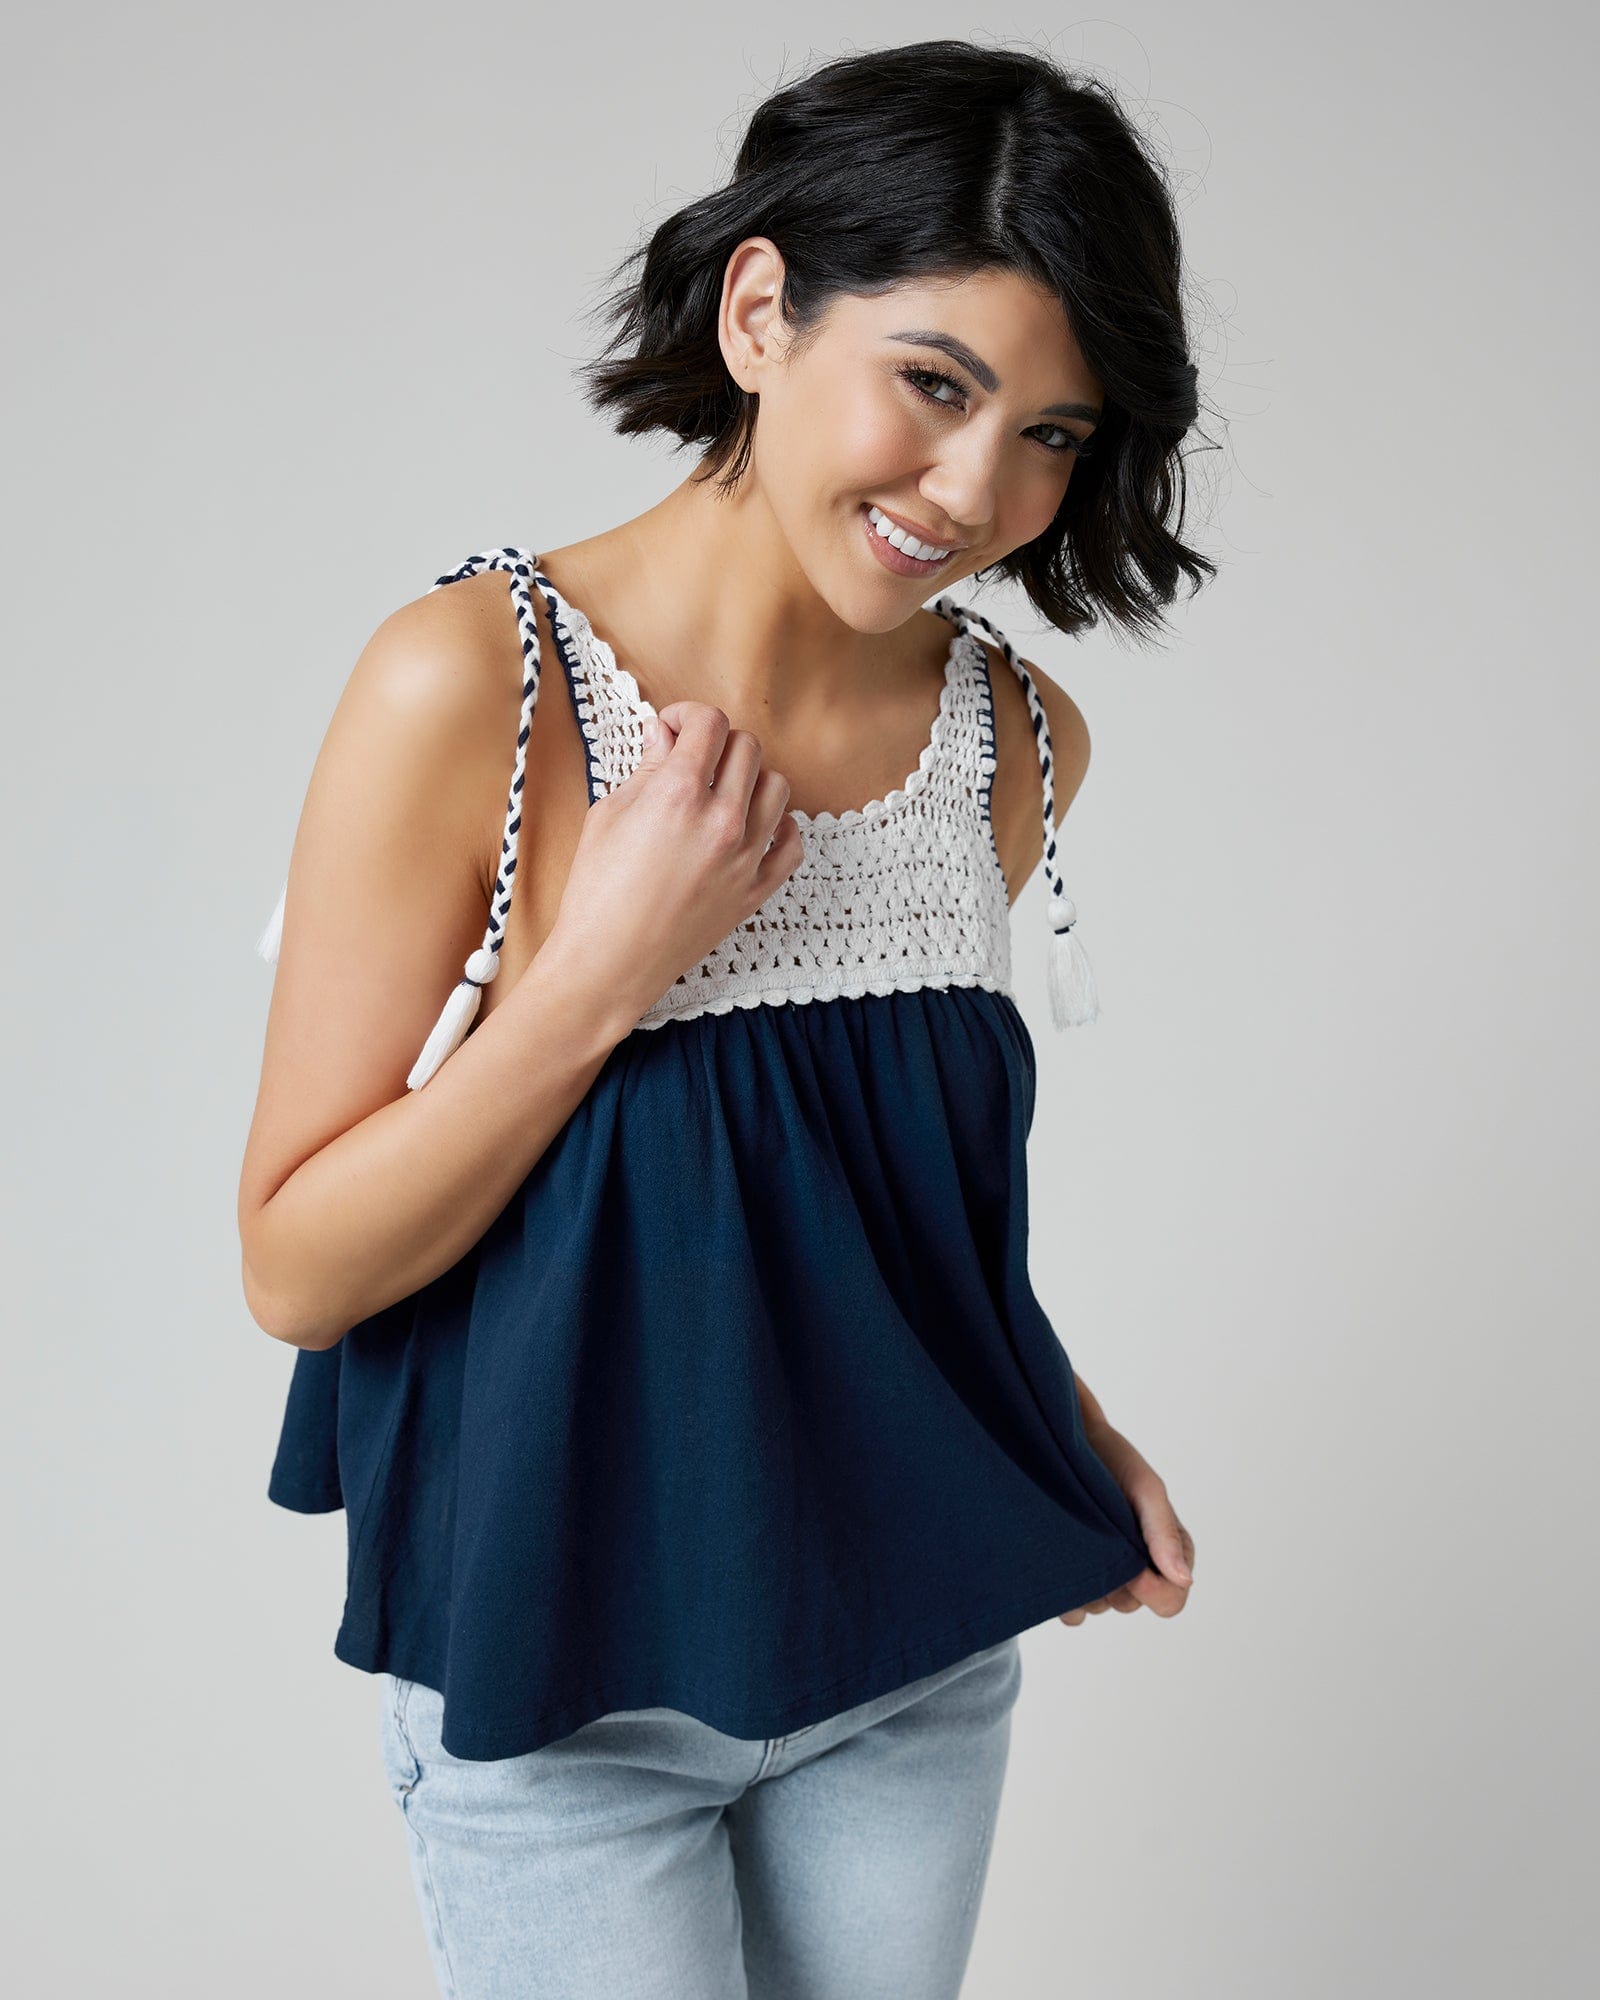 Woman in a navy tank top with crocheted fabric at top